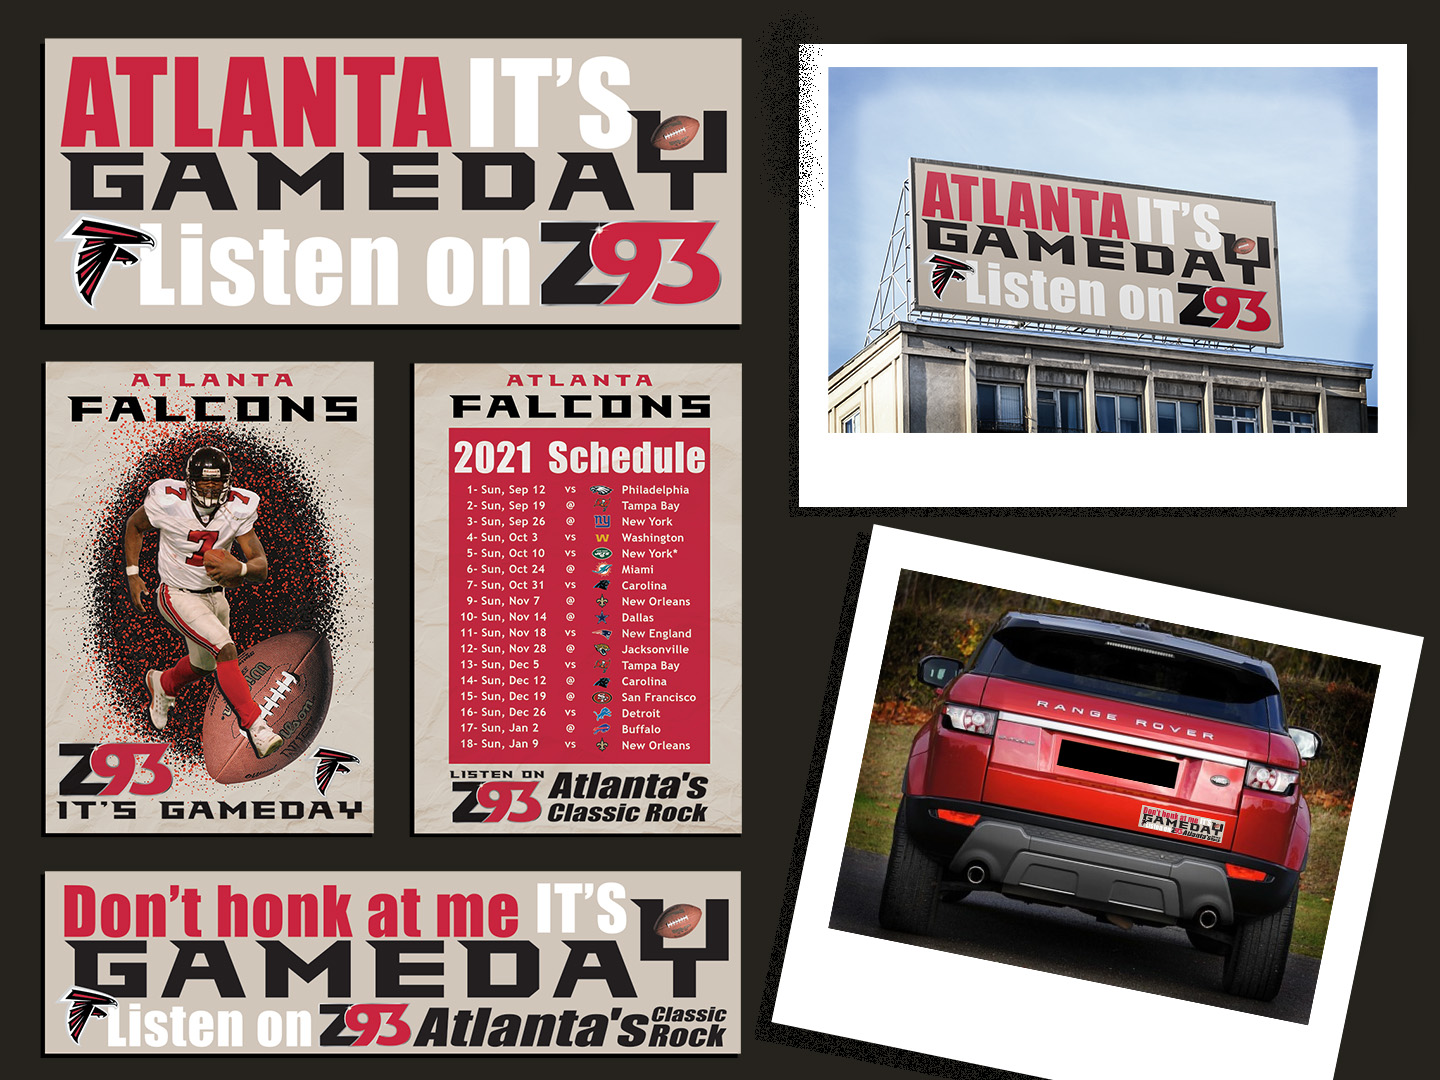  / “Falcons x Z93 Ad Campaign” Billboard 14 x 48 feet, Promotional flyer 8.5 x 11 inches, Bumper sticker 5 x 15 inches, 2021. This advertising campaign is made with the KPI of attaining more listeners for Z93 on the Falcons’ game day.